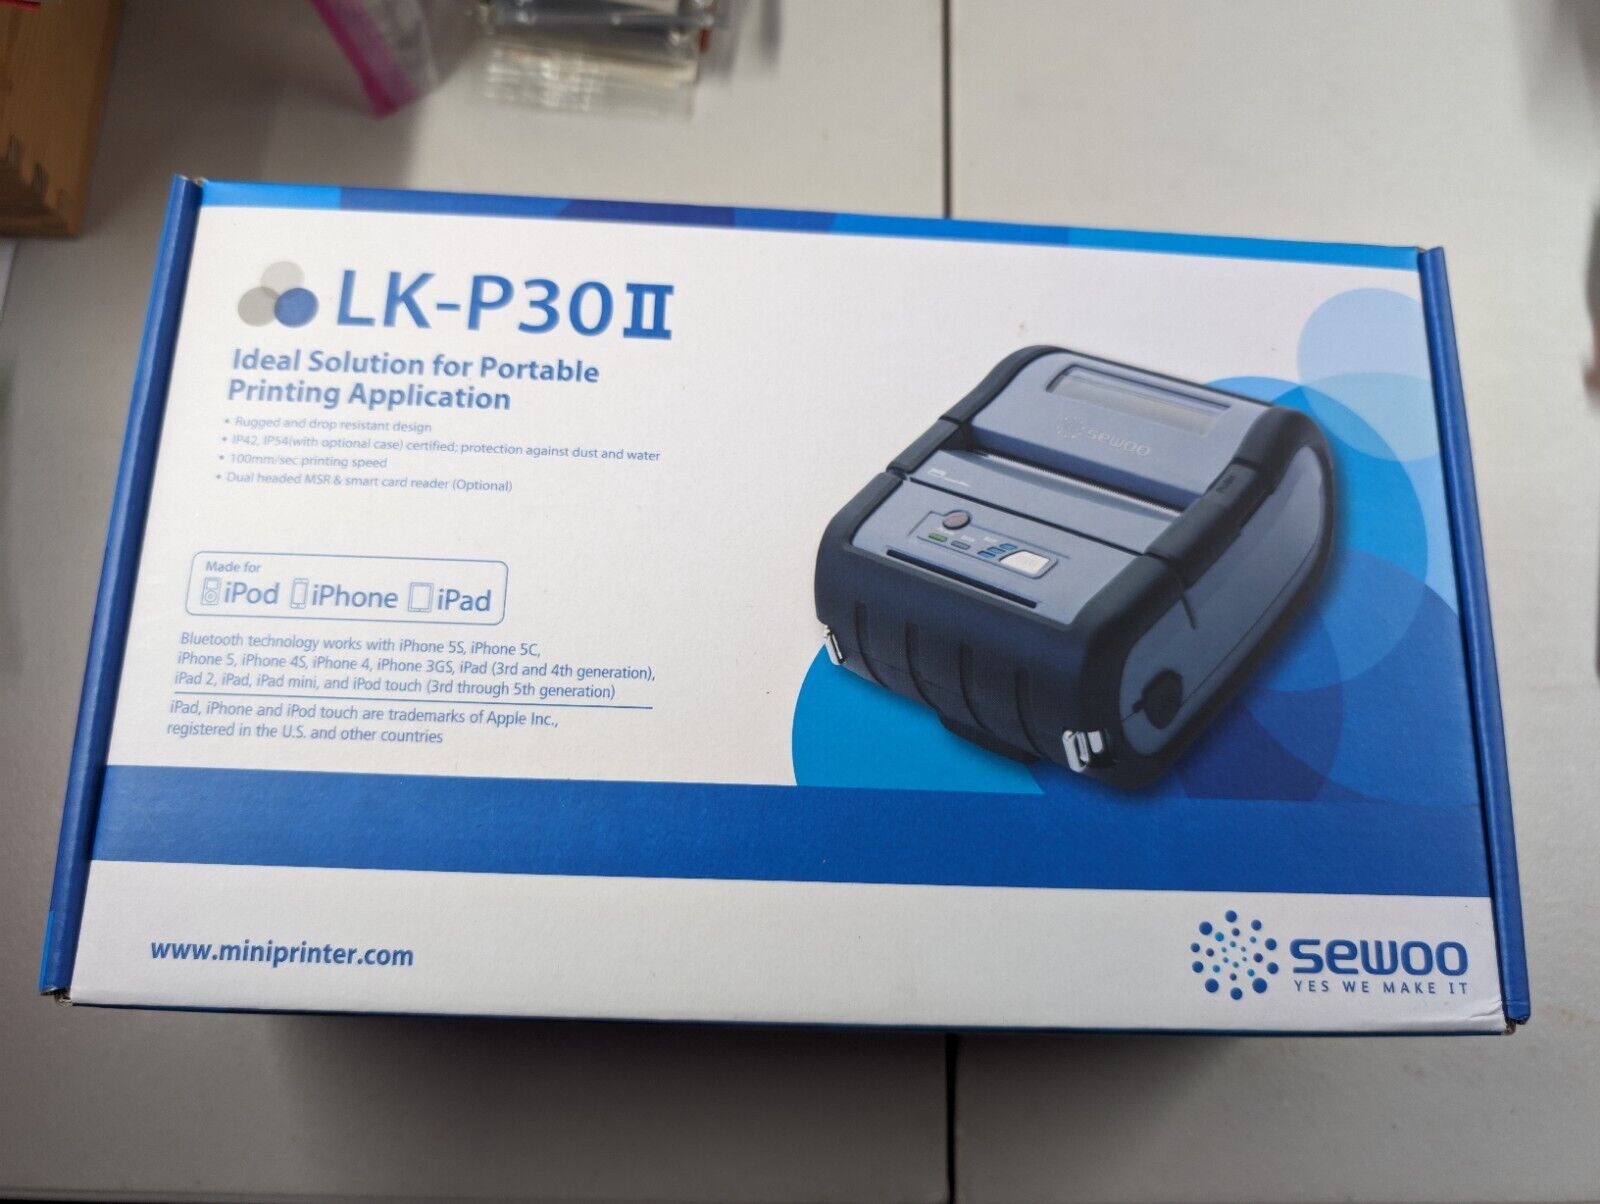 Sewoo LK-P30IISB Mobile Blu Tooth Thermal Printer OPEN BOX TESTED Great Deal